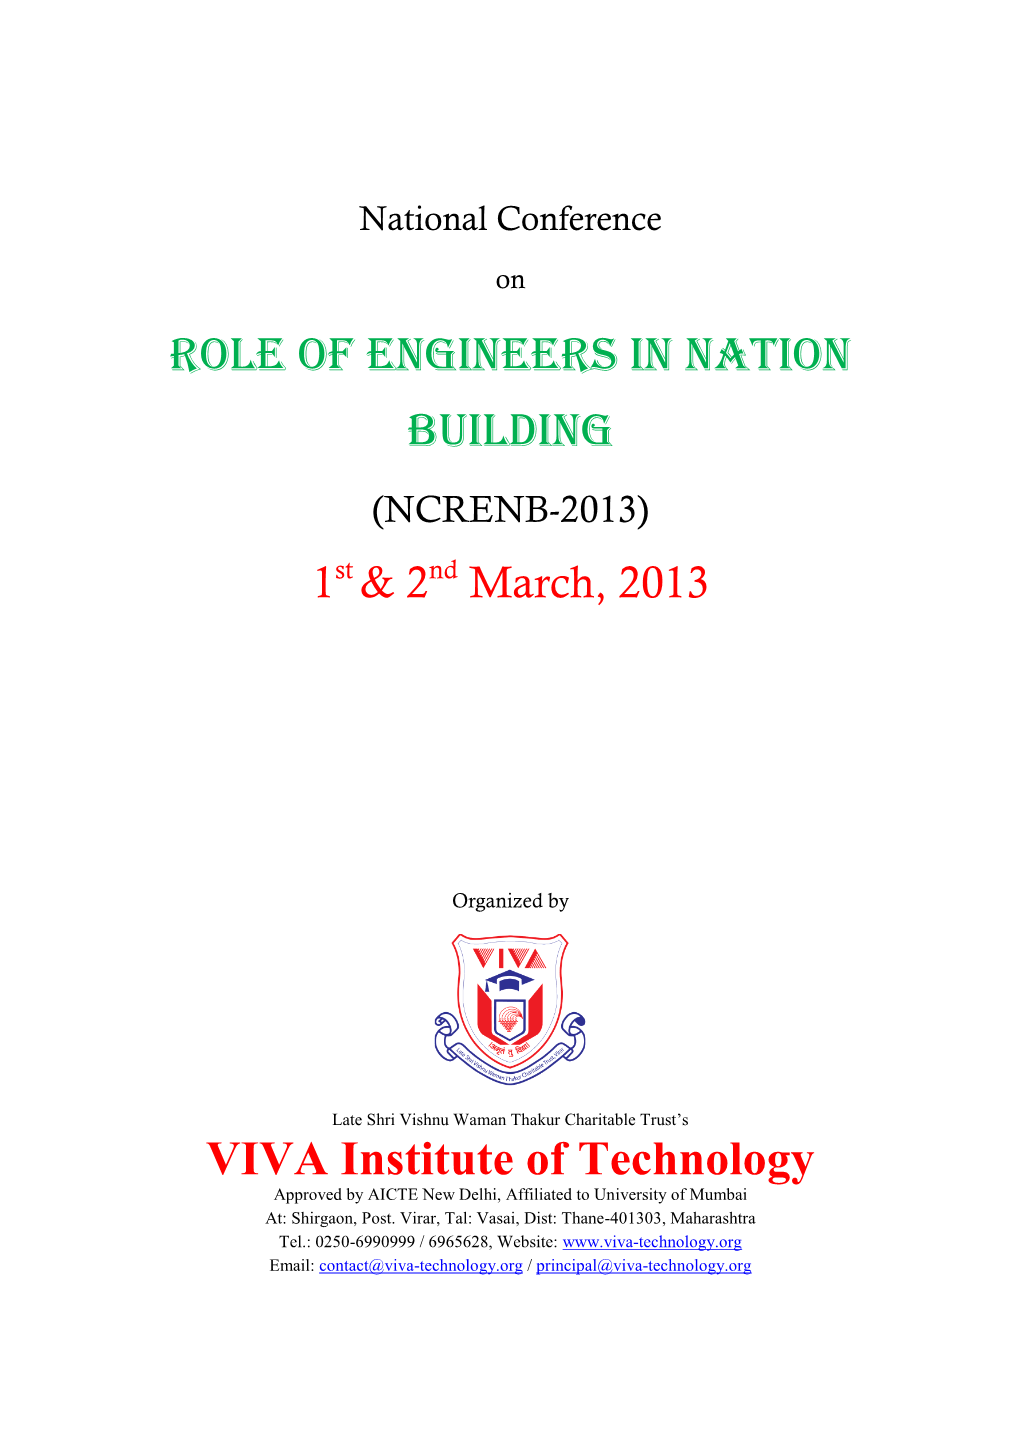 Role of Engineers in Nation Building VIVA Institute of Technology